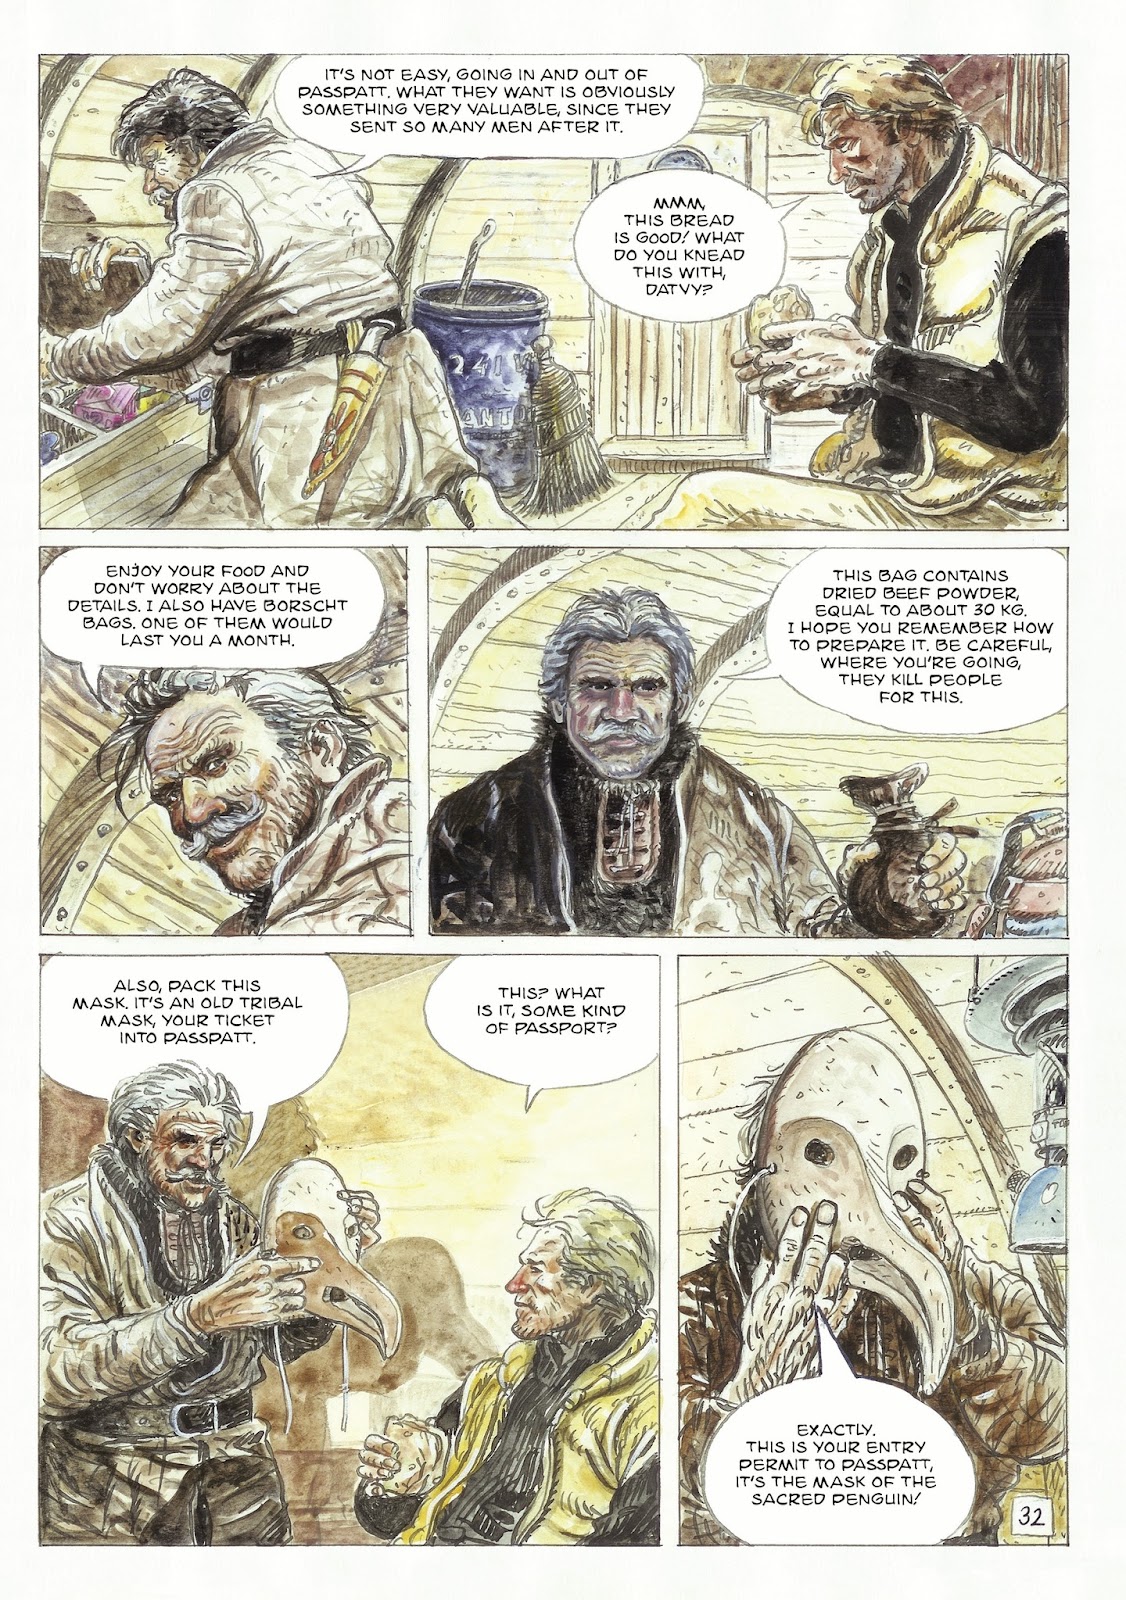 The Man With the Bear issue 1 - Page 34